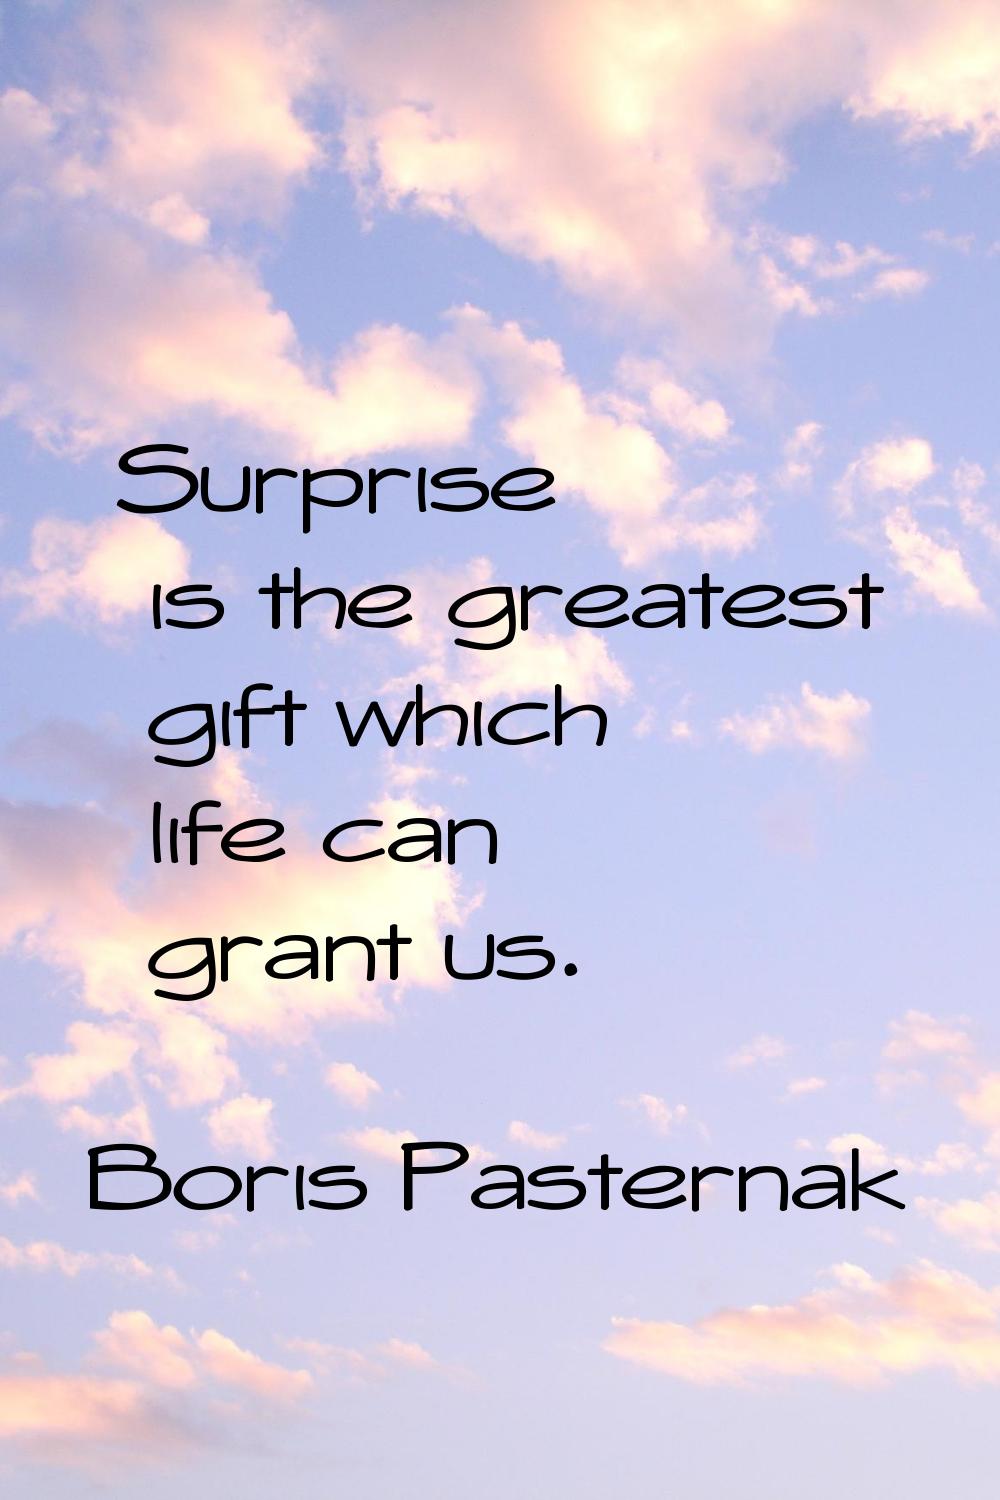 Surprise is the greatest gift which life can grant us.